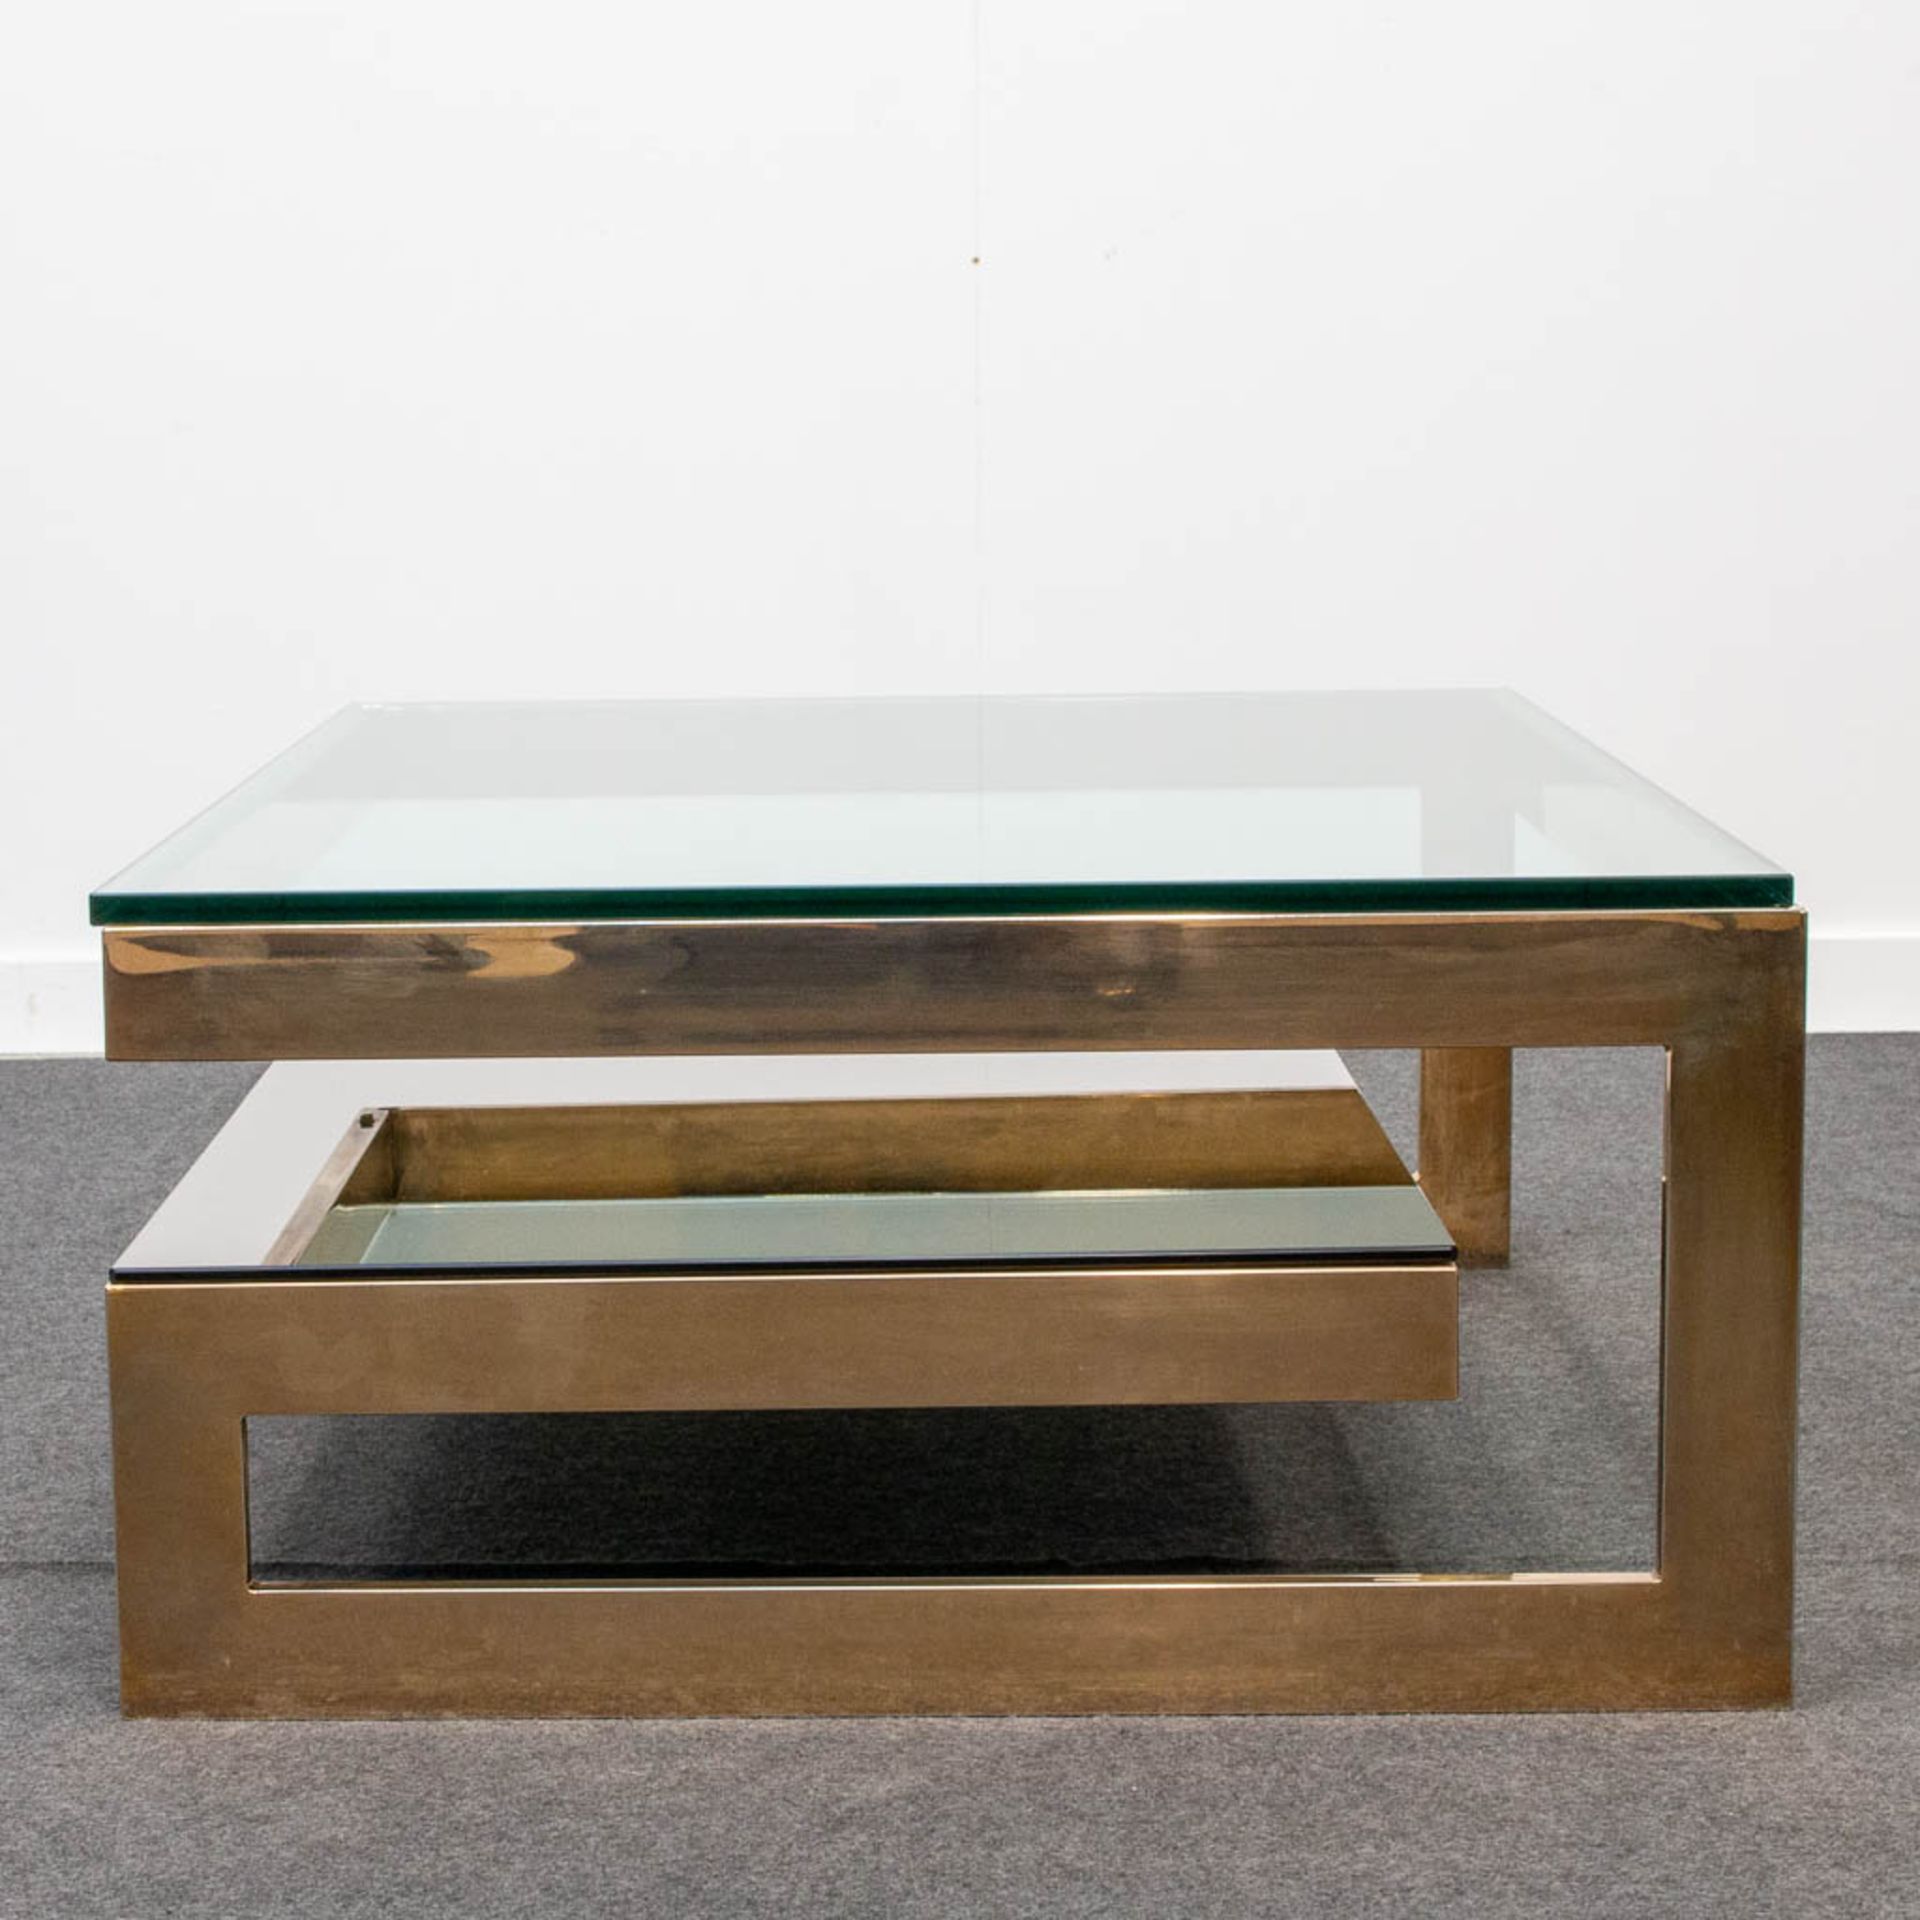 A Belgo-Chrom G-Shape coffee Table with fumé glass and clear glass. 20th century. - Image 6 of 19